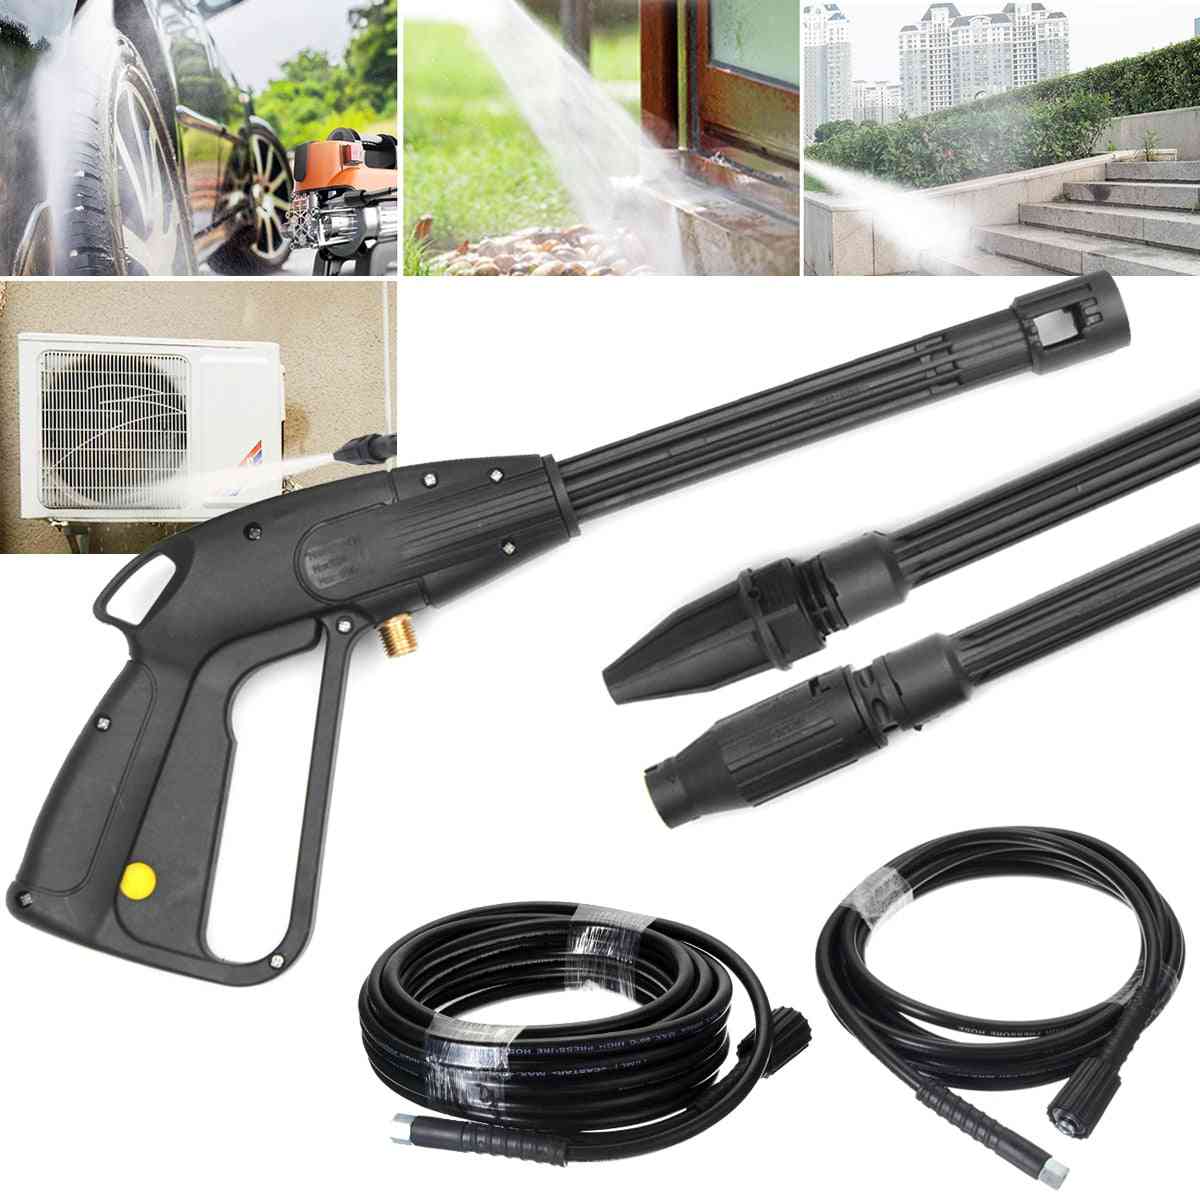 High Pressure, Washer Spray Nozzle, Water Guns With Extension Jet Hose Connector